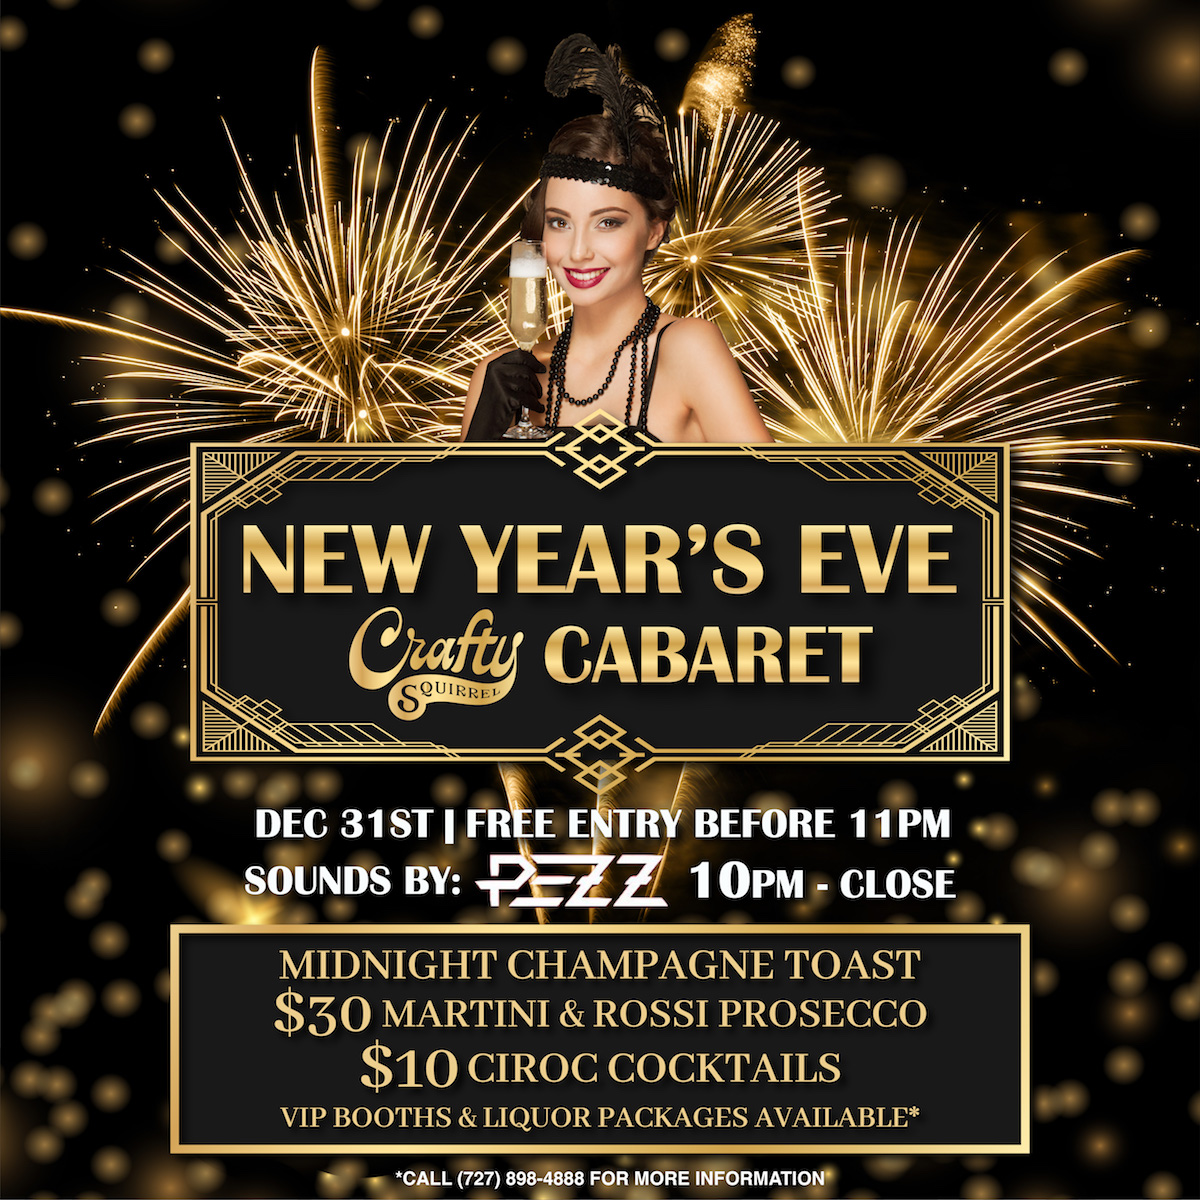 It’s A Champagne Wishes and Cabaret Dreams Dance Party for Crafty Squirrel’s NYE 2020 Bash